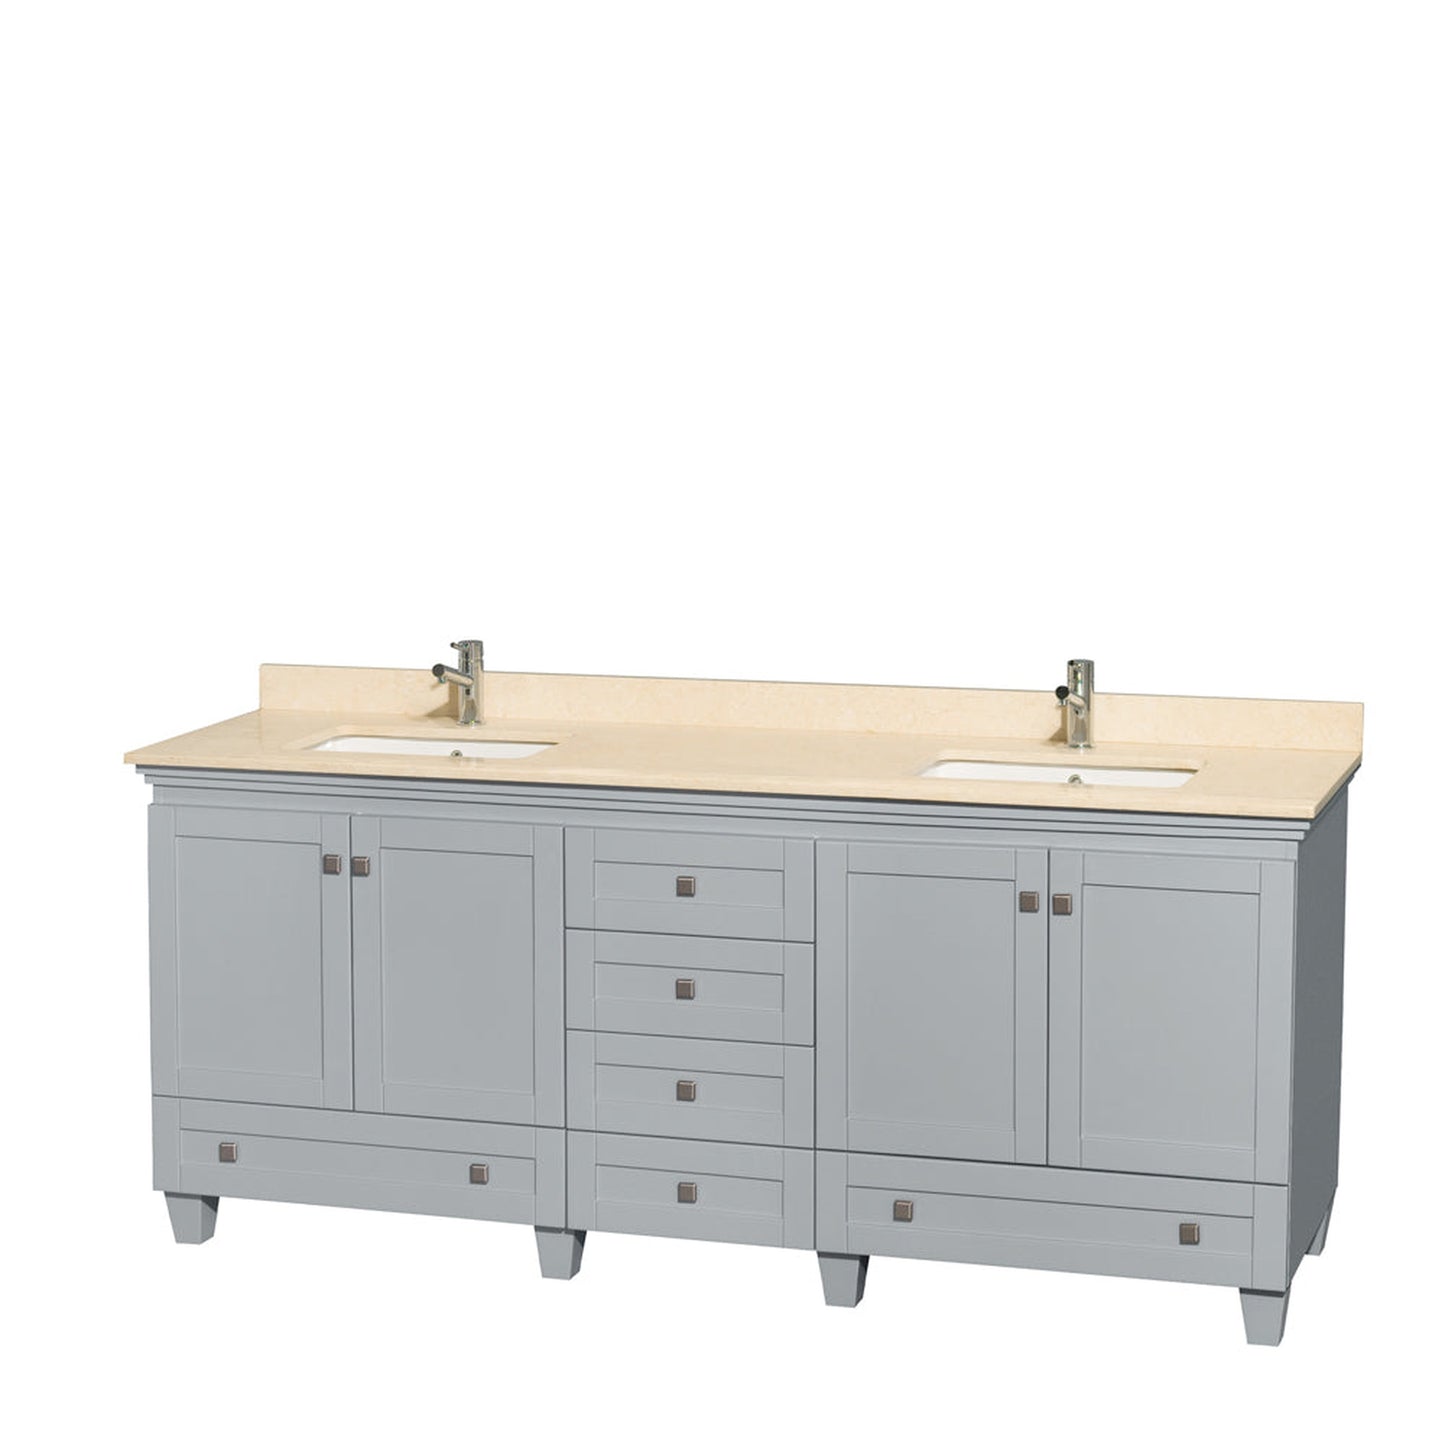 Wyndham Collection Acclaim 80" Double Bathroom Vanity in Oyster Gray With Ivory Marble Countertop & Undermount Square Sink